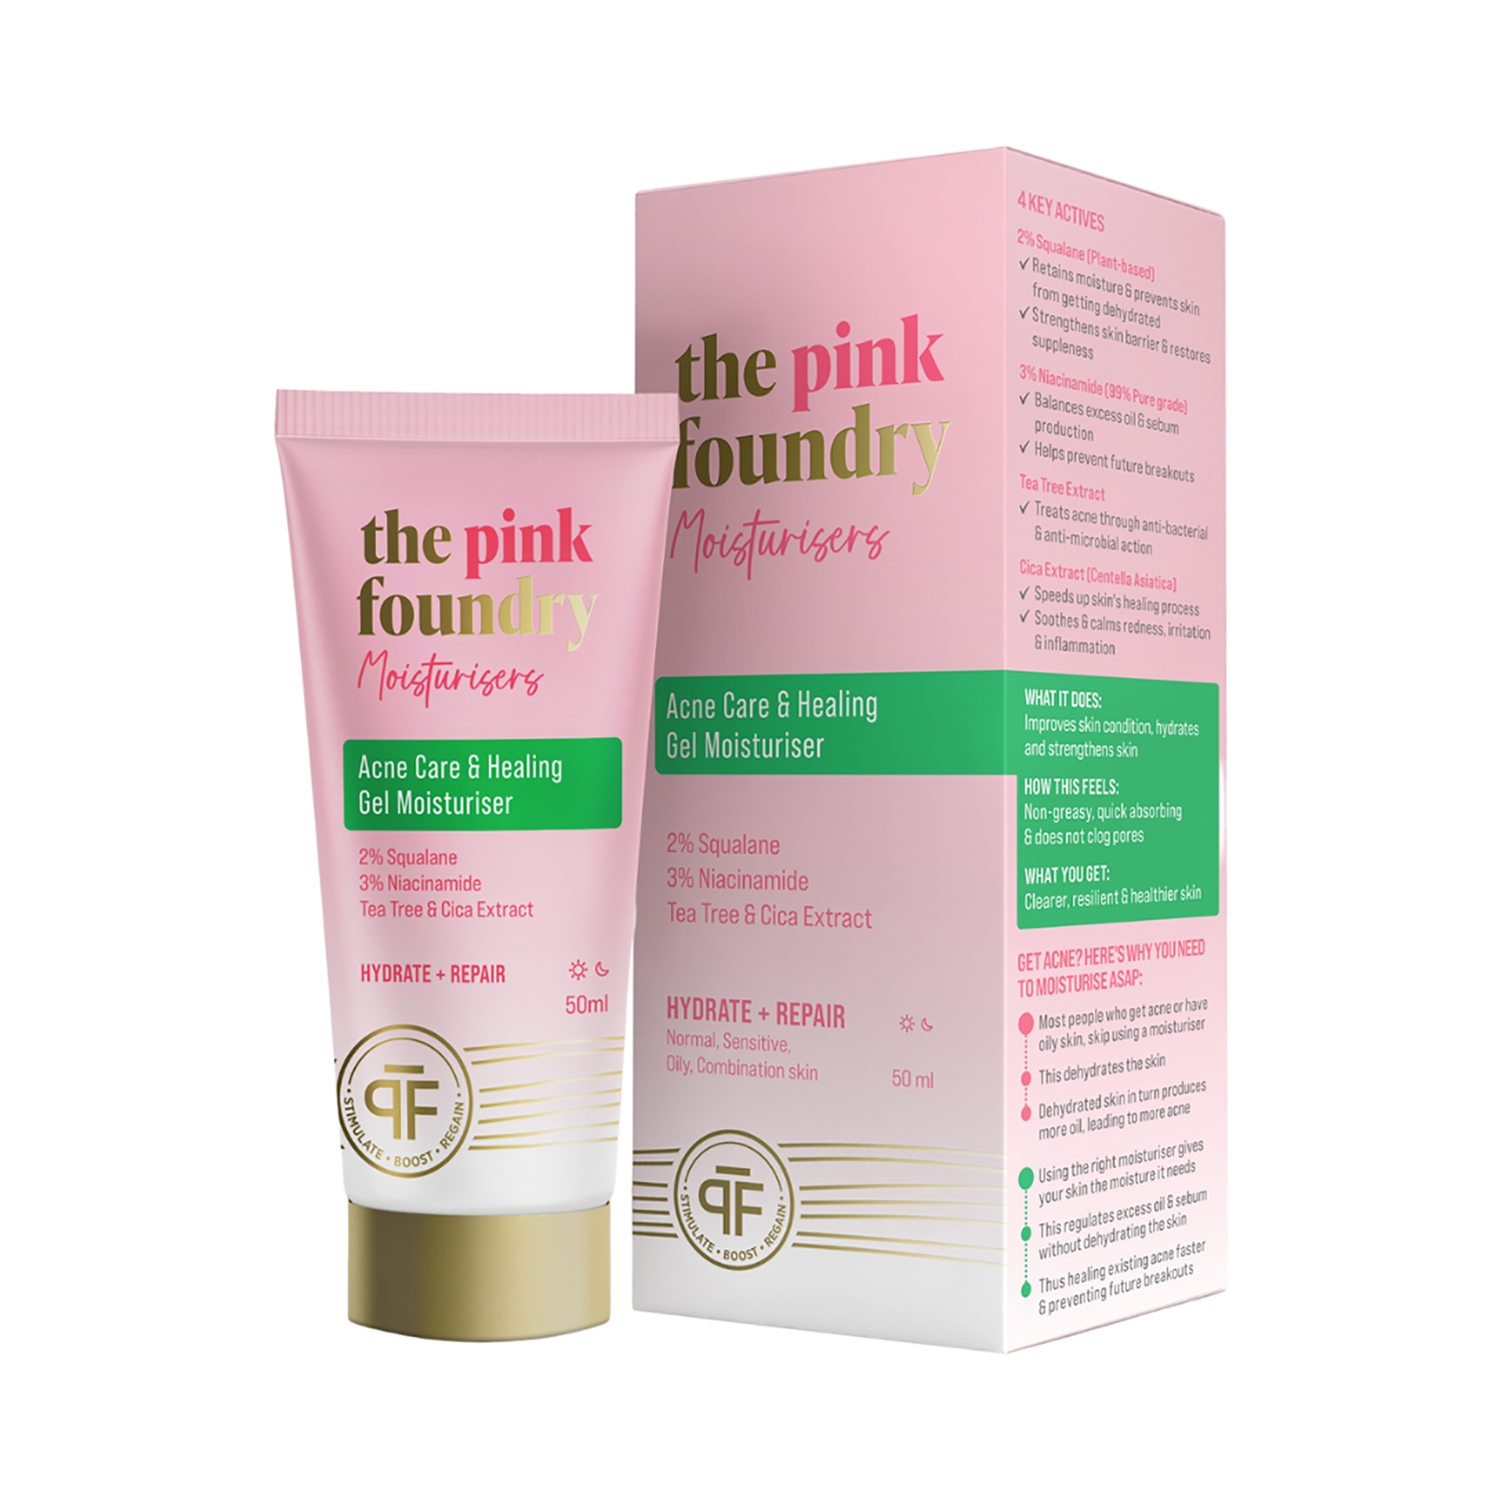 The Pink Foundry | The Pink Foundry Acne Care & Healing Gel Moisturiser (50ml)